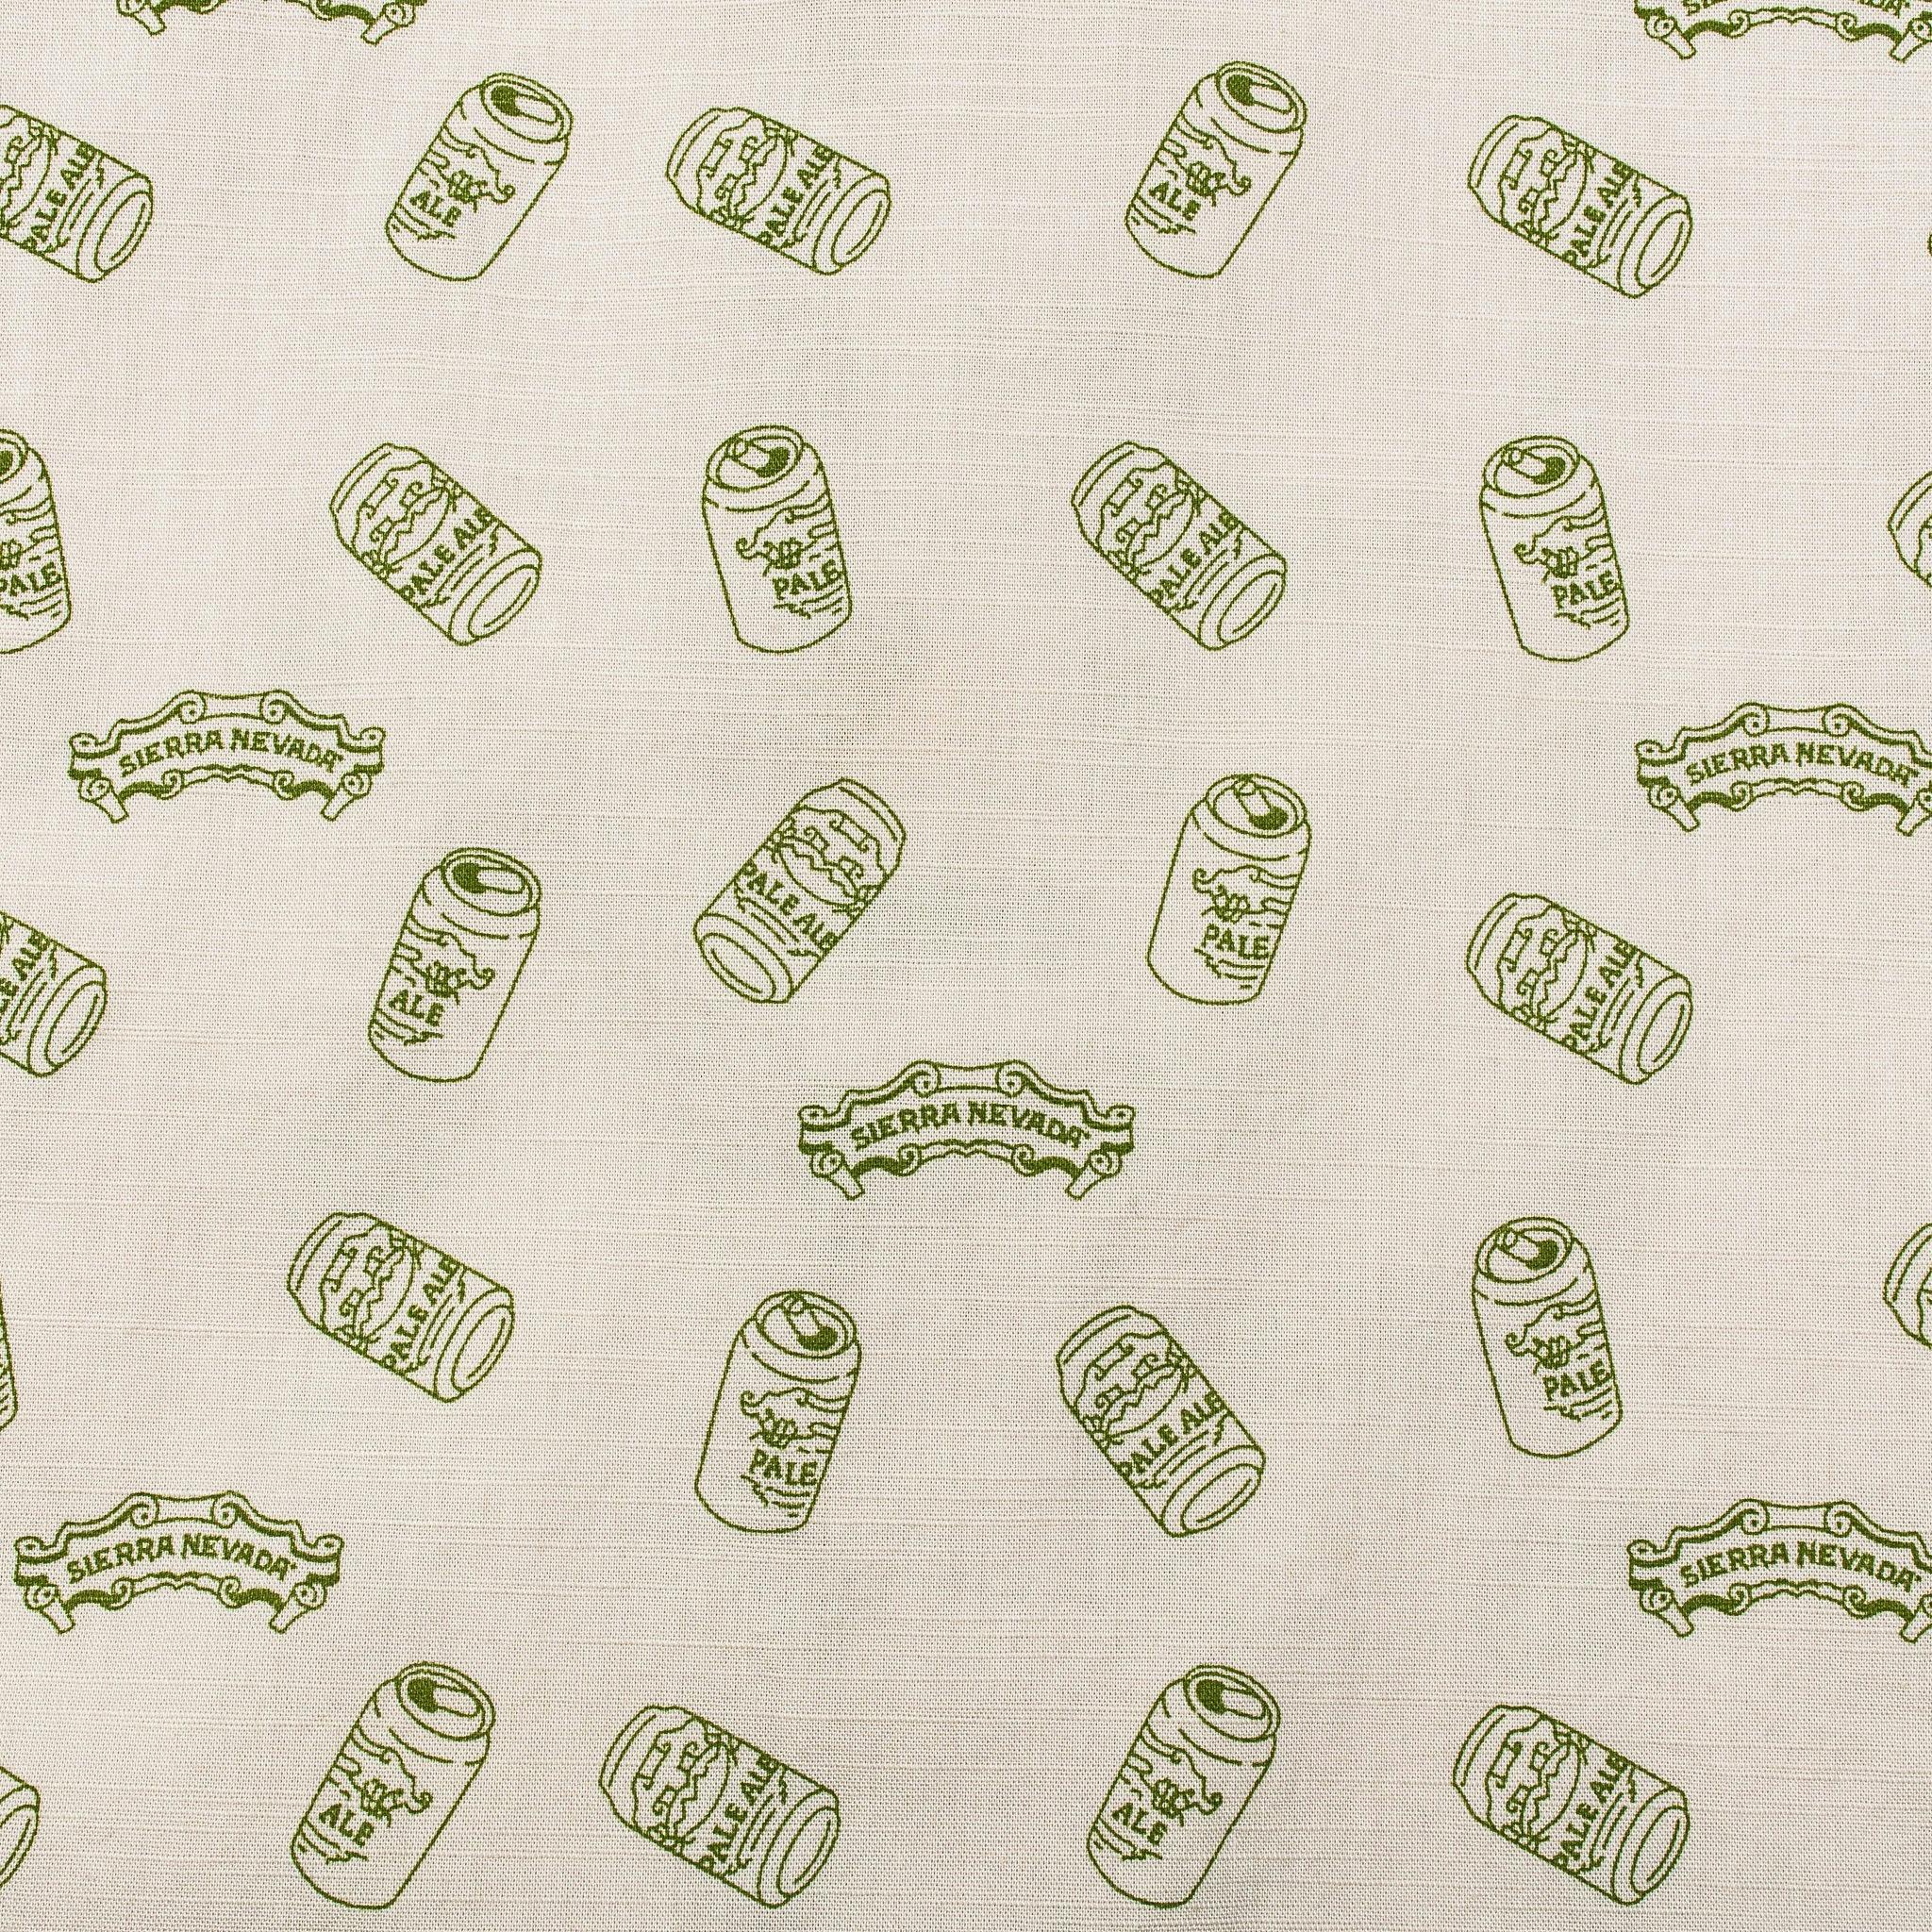 Men's Pale Ale Icon Custom Button Up detail shot of the pale ale can print